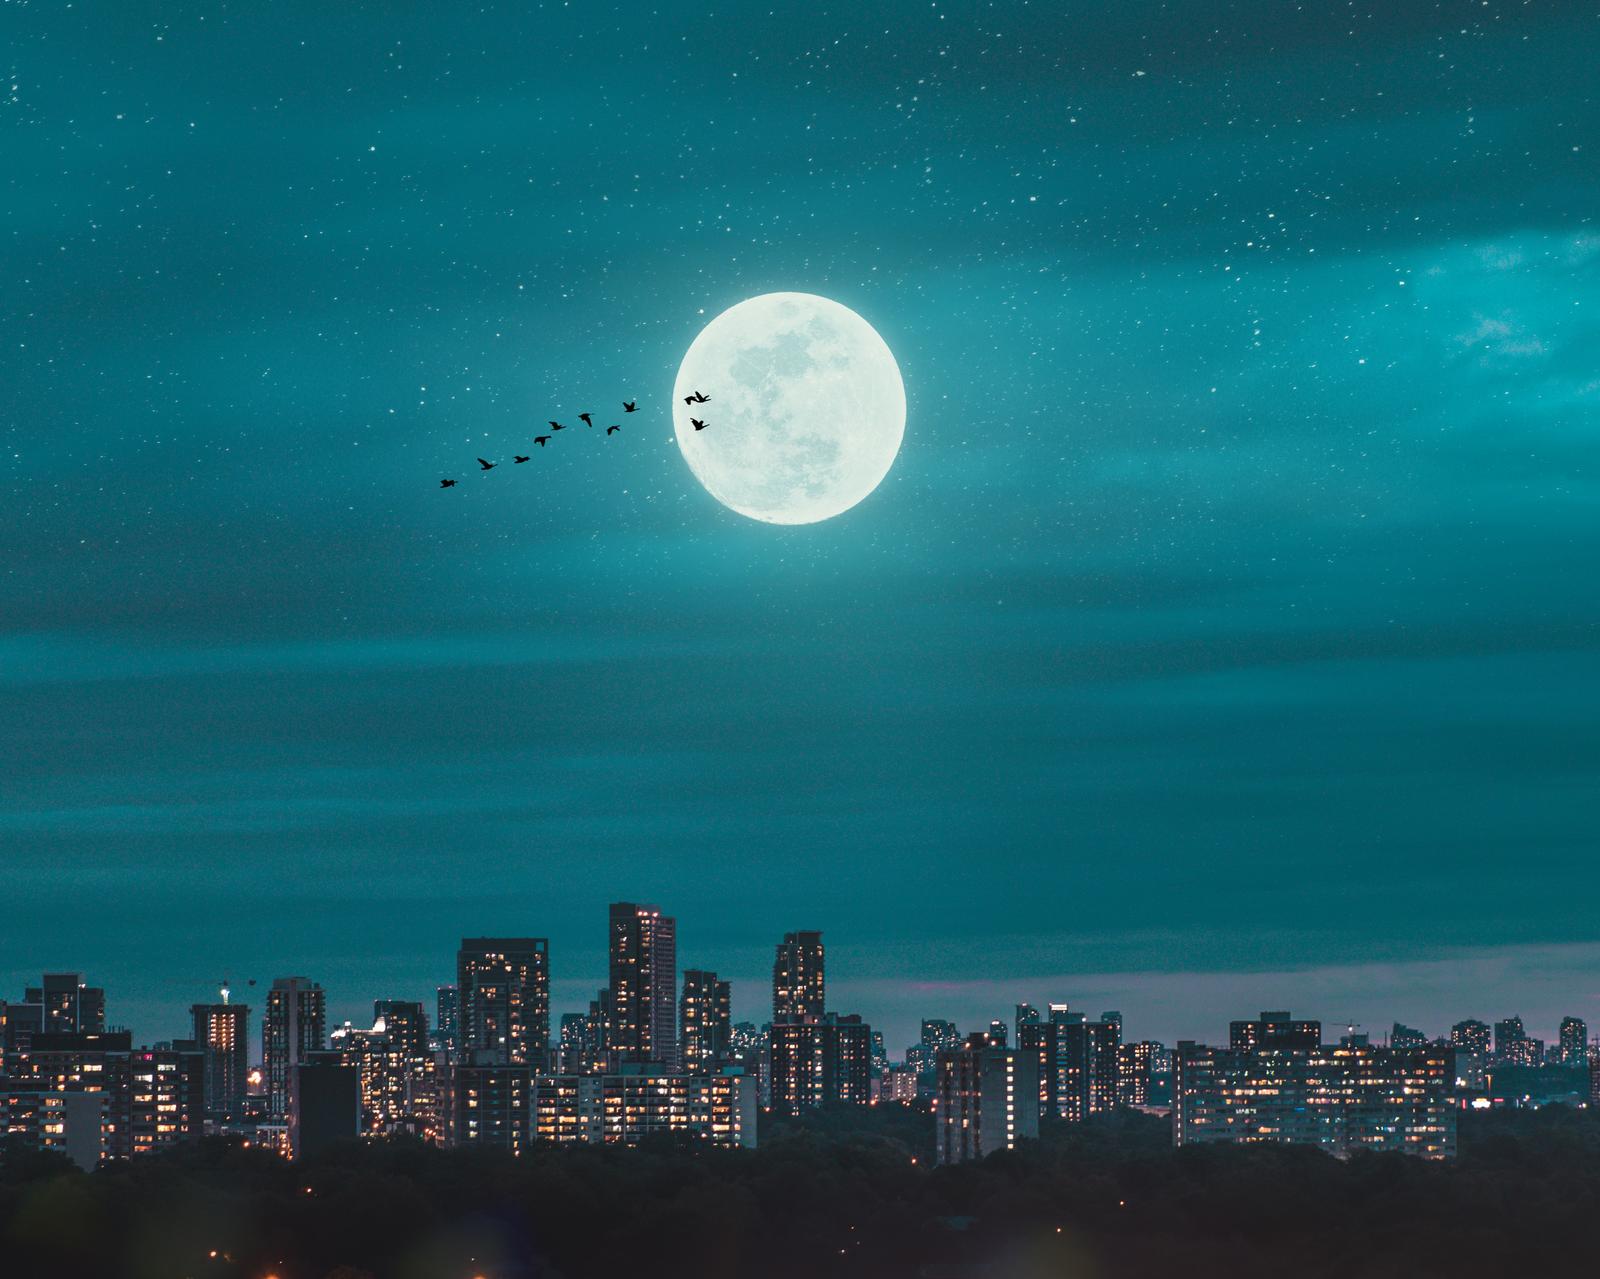 Can You *Actually* Score at Least 83% On This All-Rounded Knowledge Quiz? Full moon over city skyline during night time